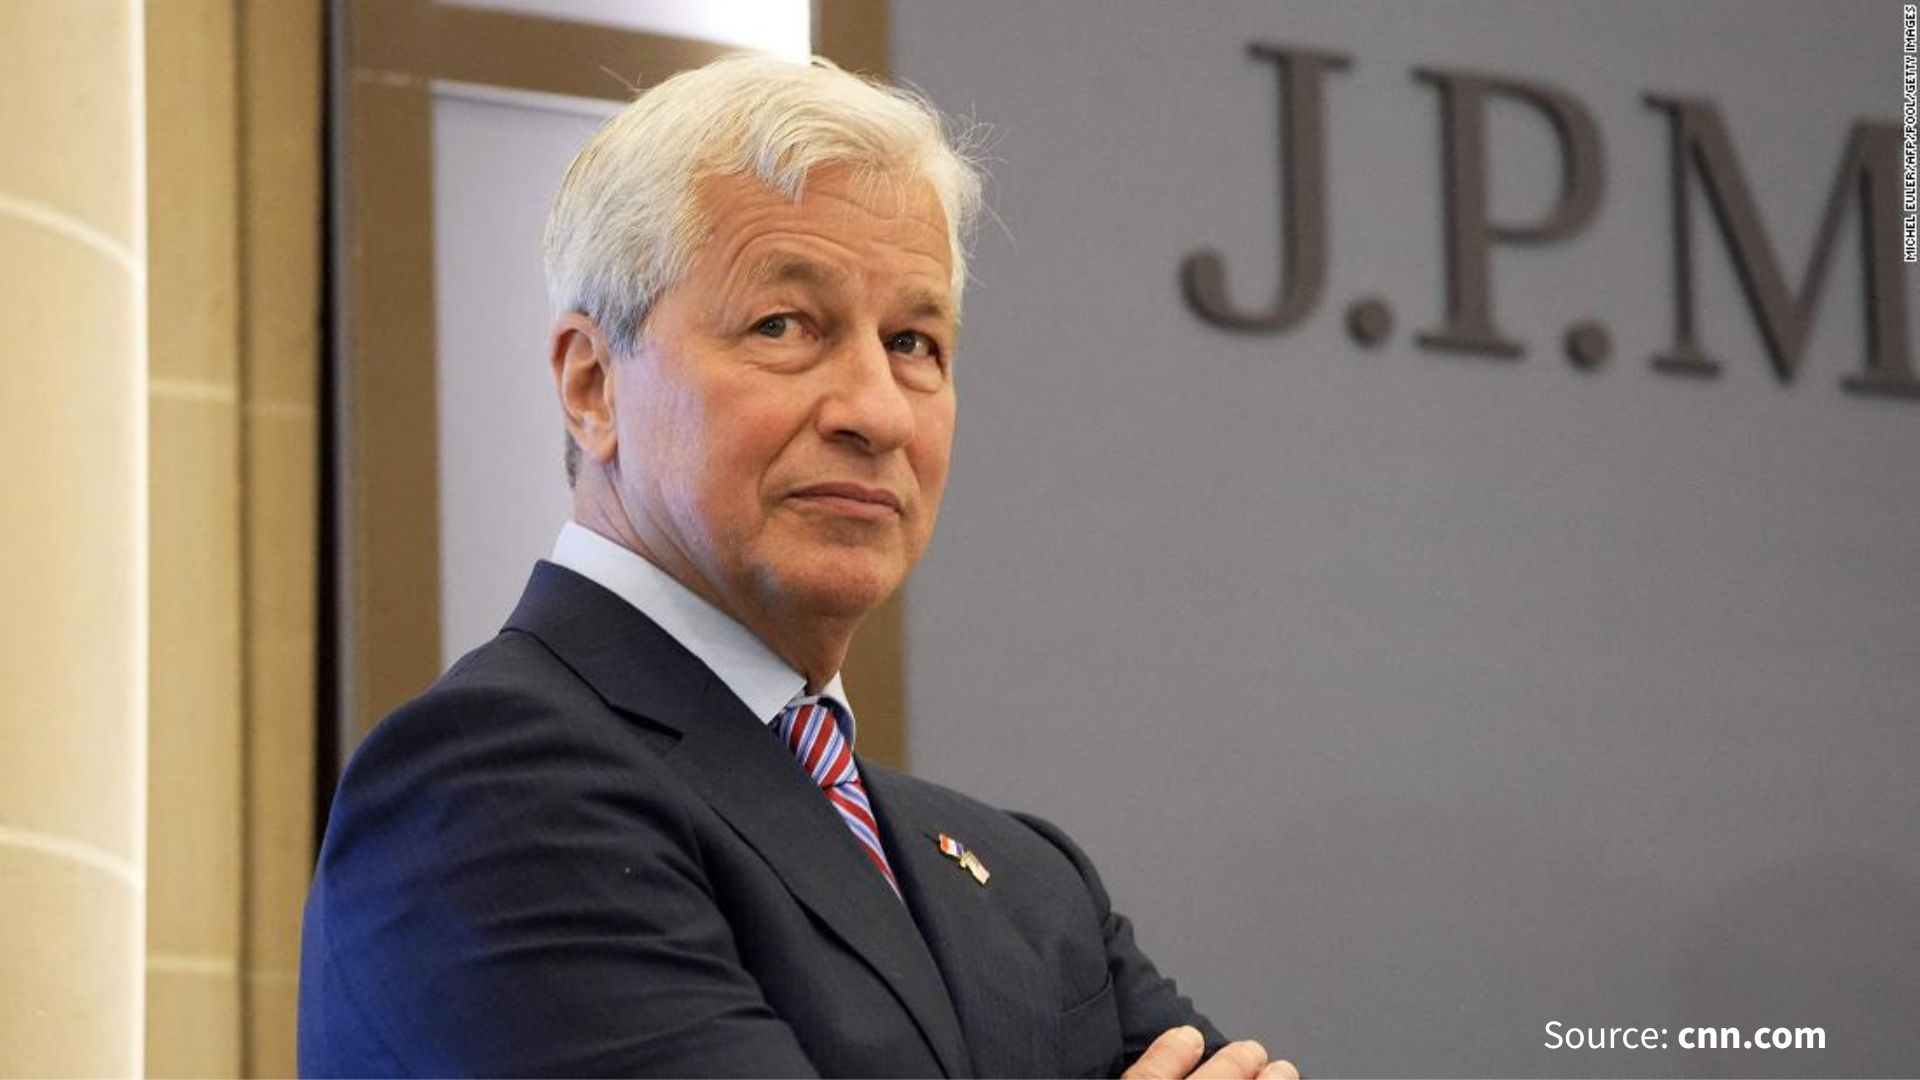 JPMorgan Chase CEO Suggests Warning Signs Ahead for U.S and Global Economy